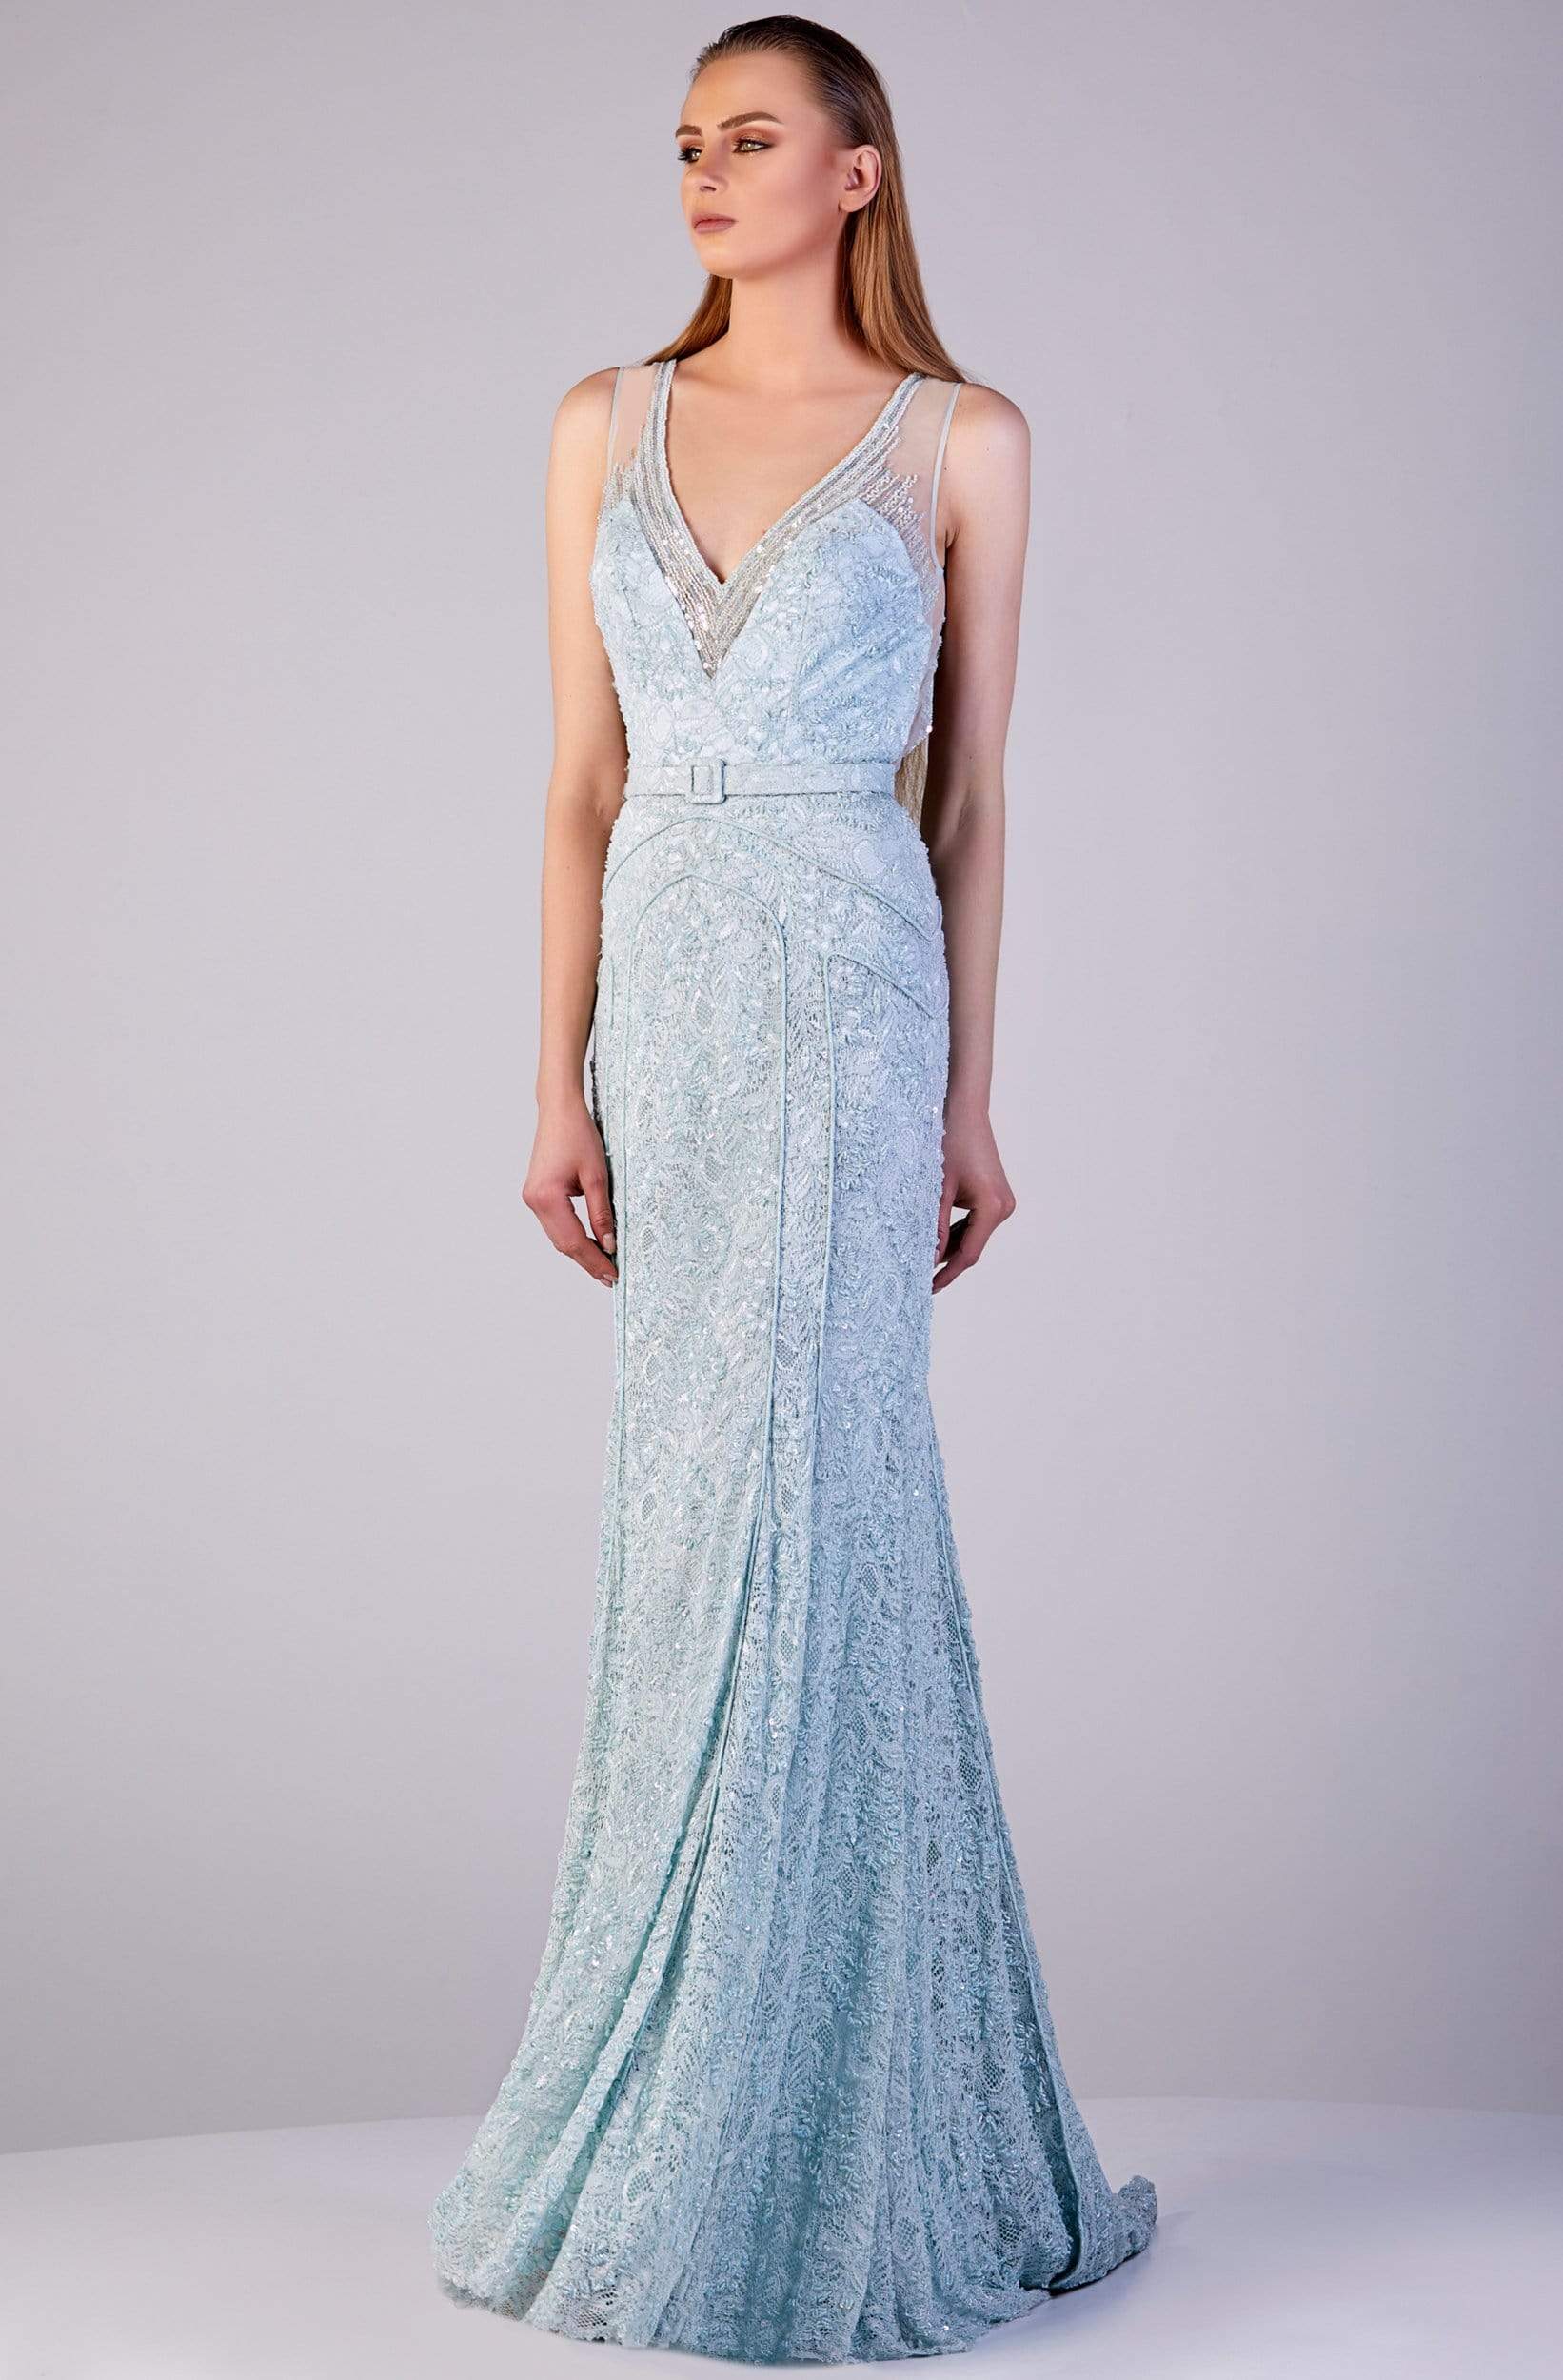 Image of Gatti Nolli Couture - ED-2694 Pipe-Ornate Sequined Lace Trumpet Gown